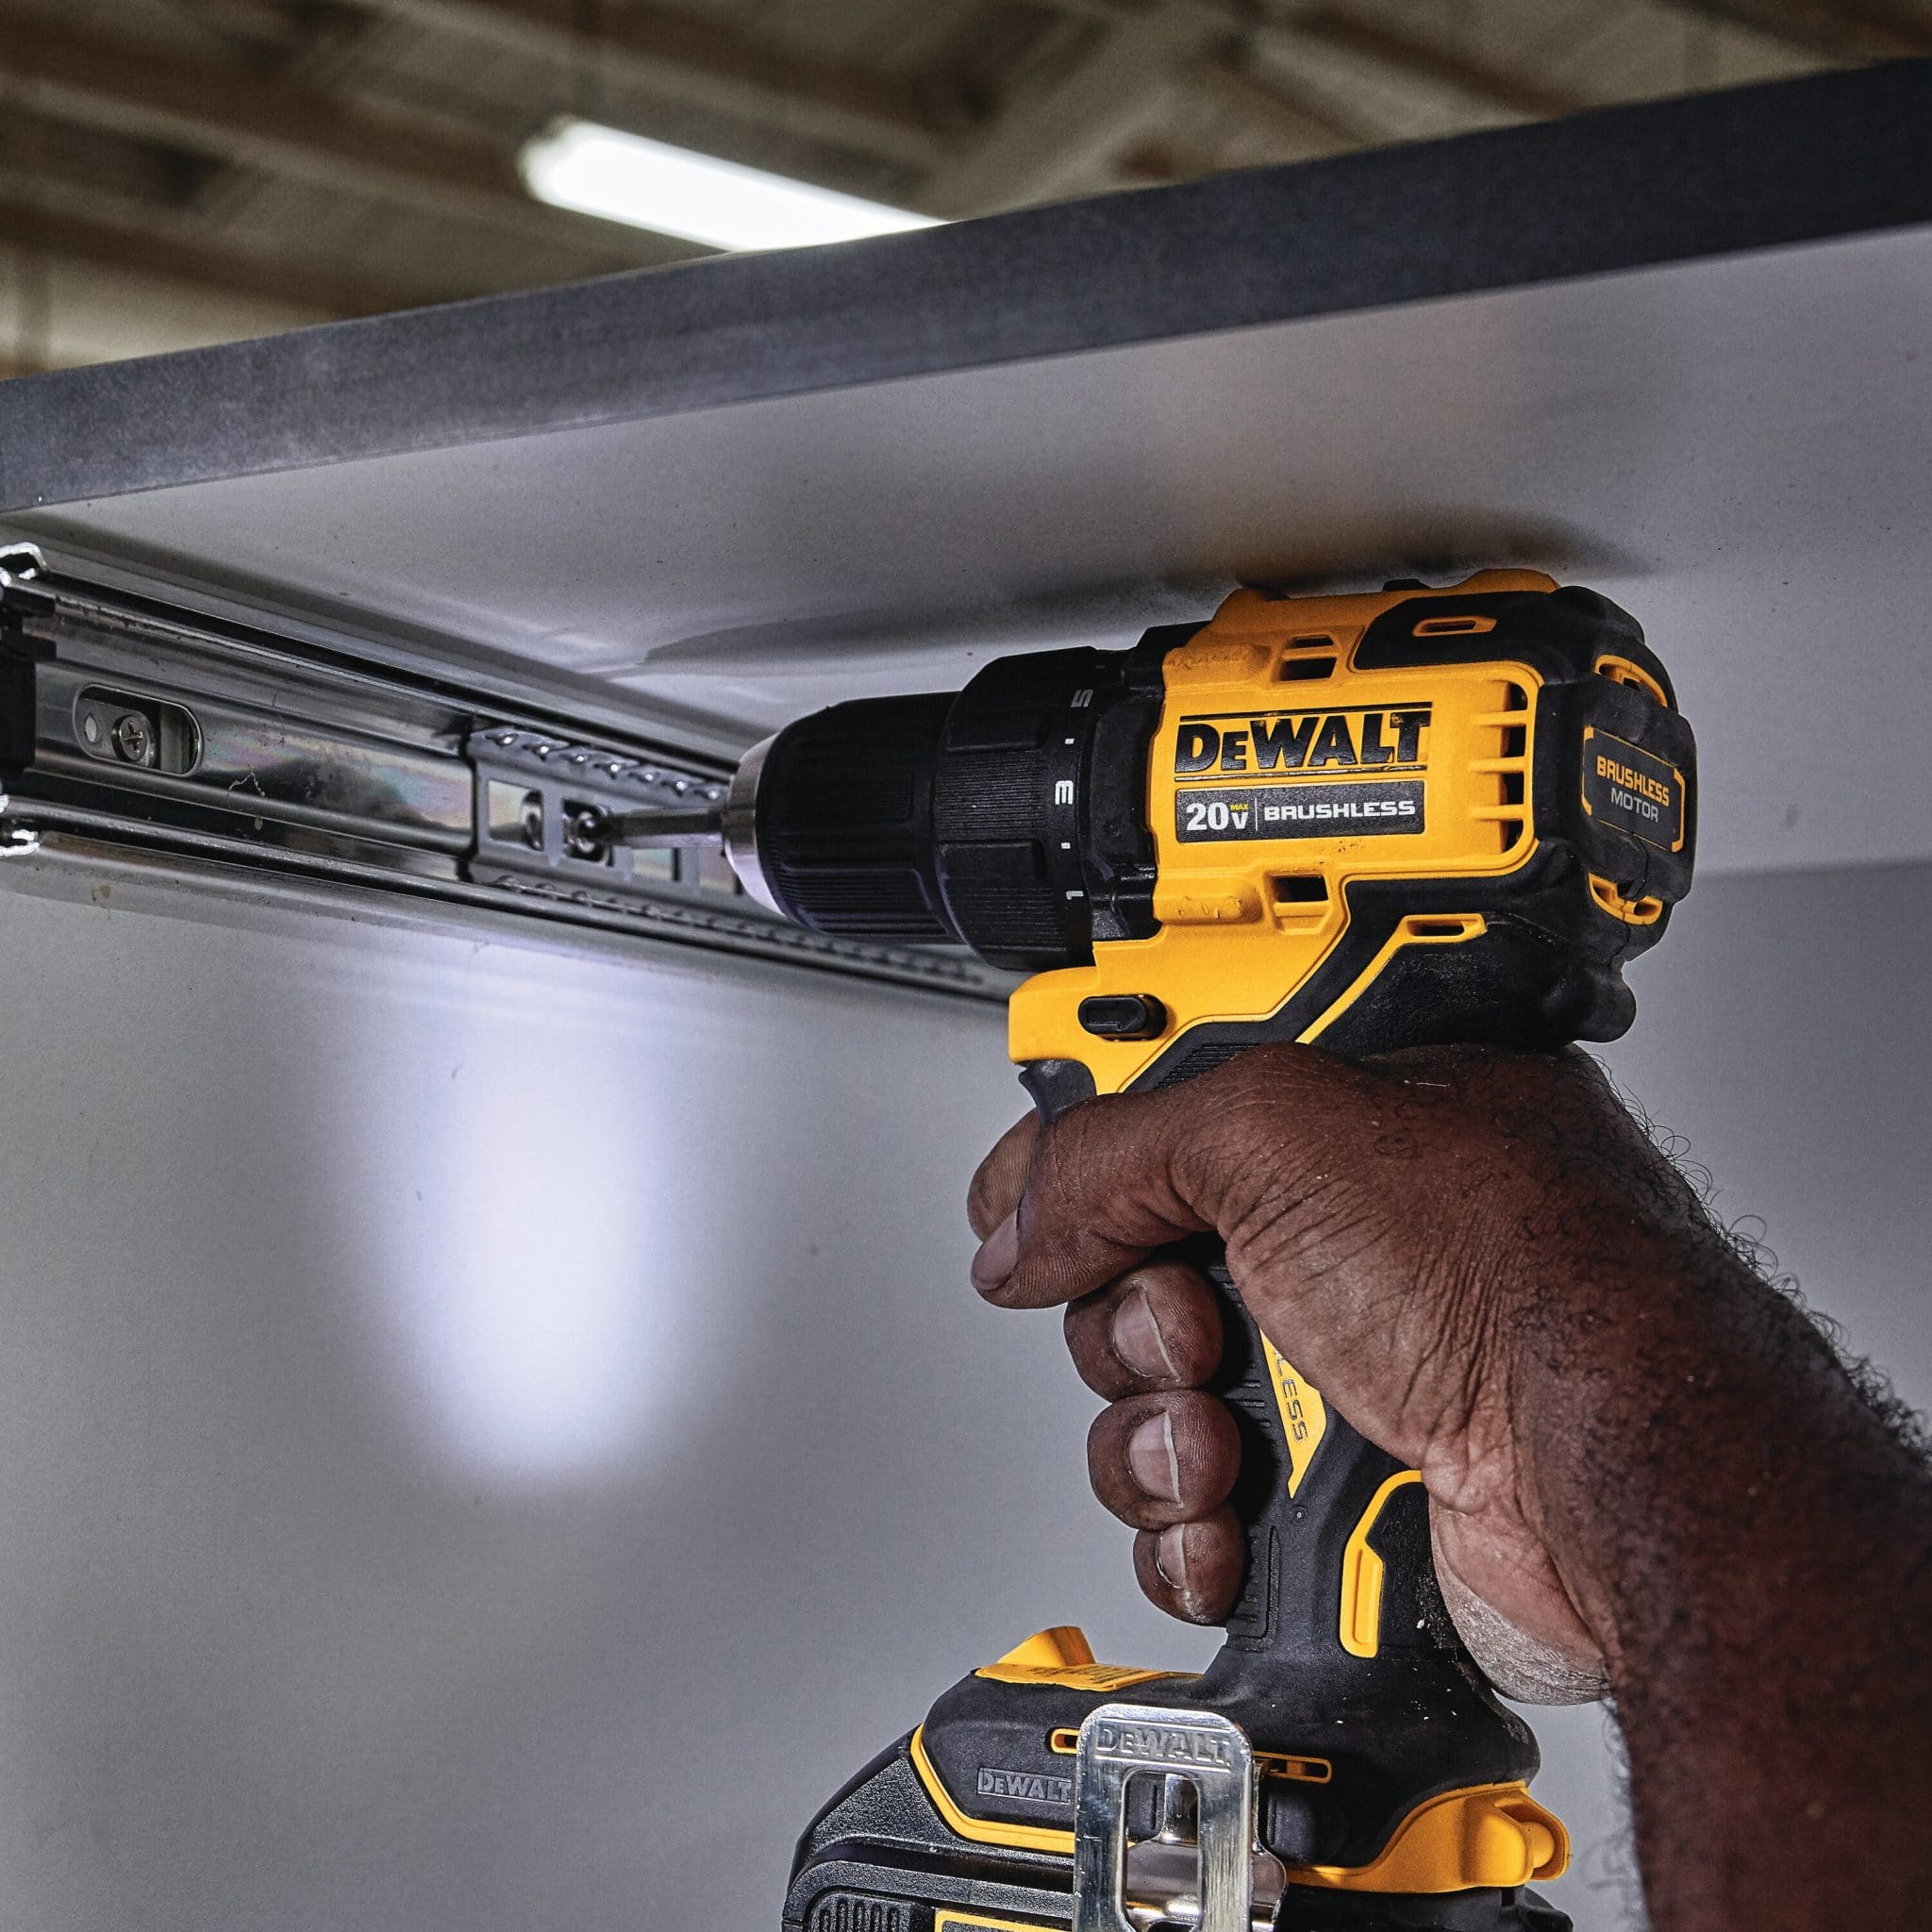 Dewalt DCD771C2 The Best Cordless Drill 6 scaled - How Long Do Cordless Drill Batteries Usually Last? - HandyMan.Guide - Cordless Drill Batteries